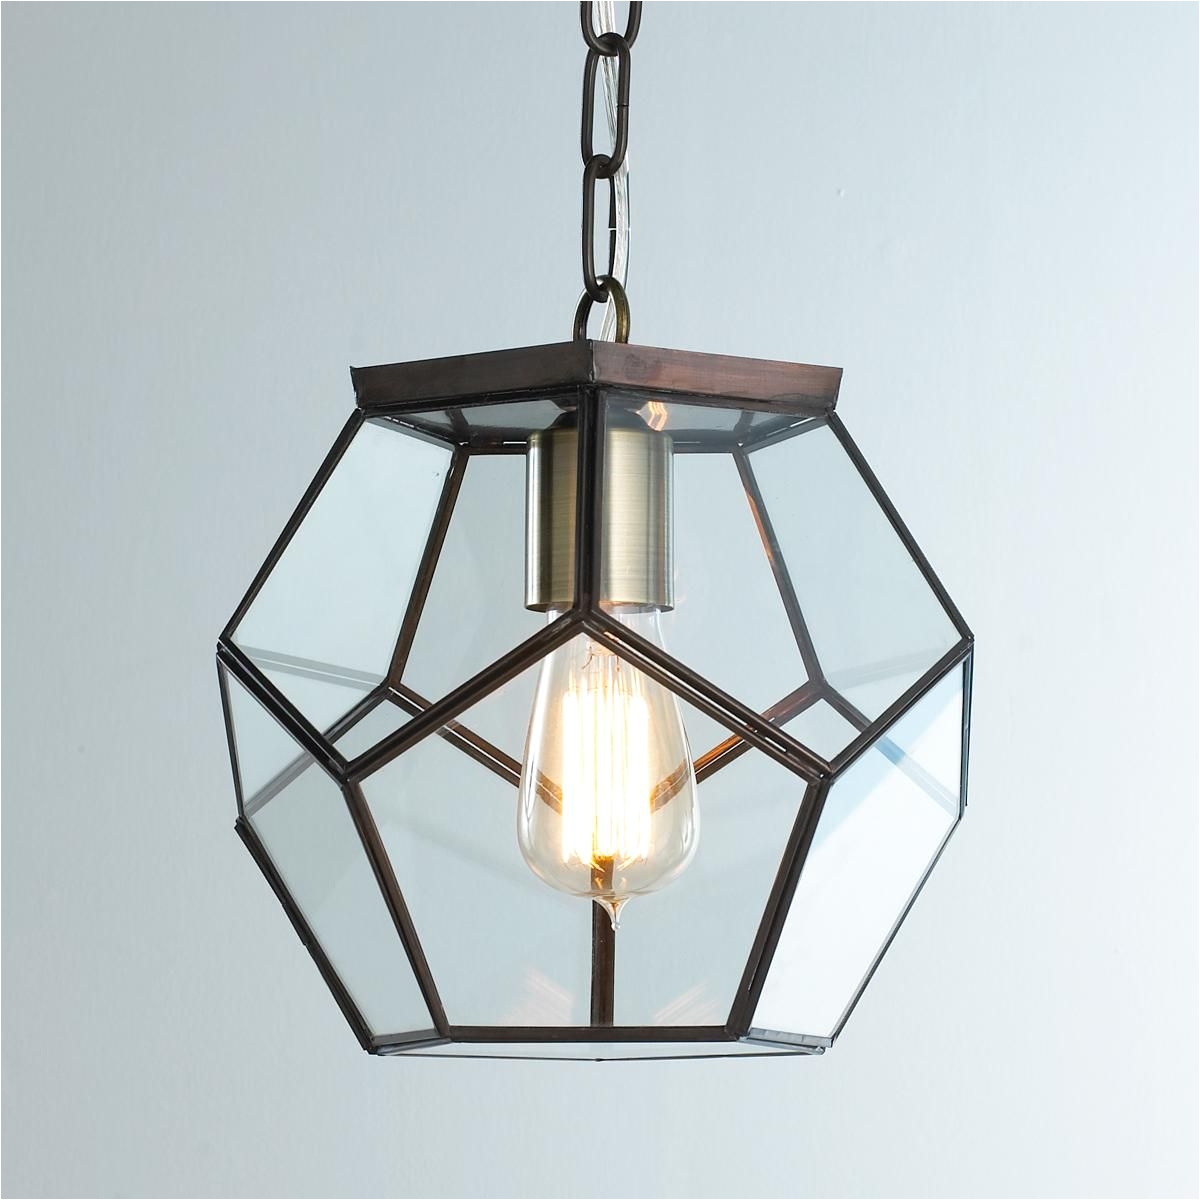 clear glass prism pentagon pendant light geometric pentagon panels of clear glass create eye catching style from the kitchen to the potting shed